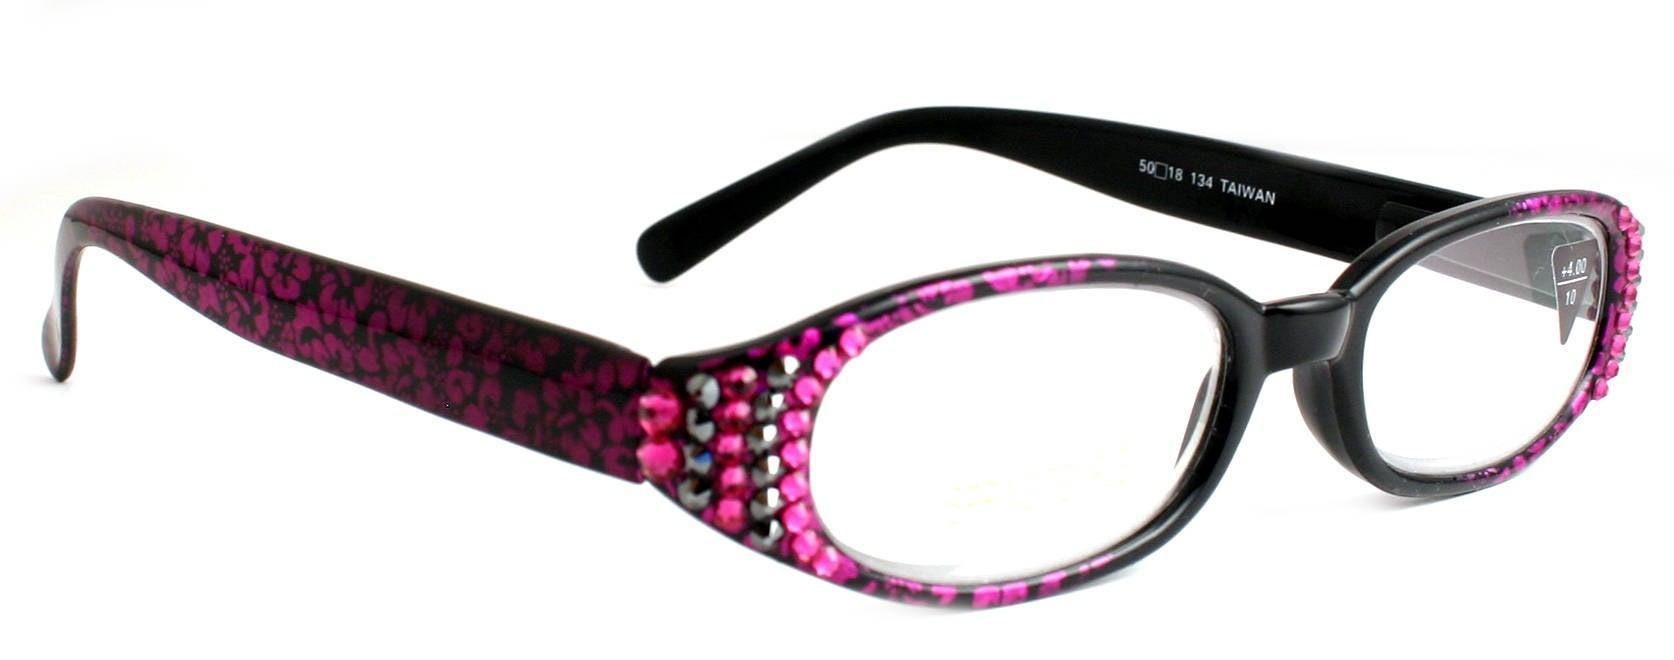 Isabella, (Bling) Reading Glasses Women W (Fuchsia, Hematite) Genuine European Crystals (Purple Floral Print) NY Fifth Avenue (Wide Frame)